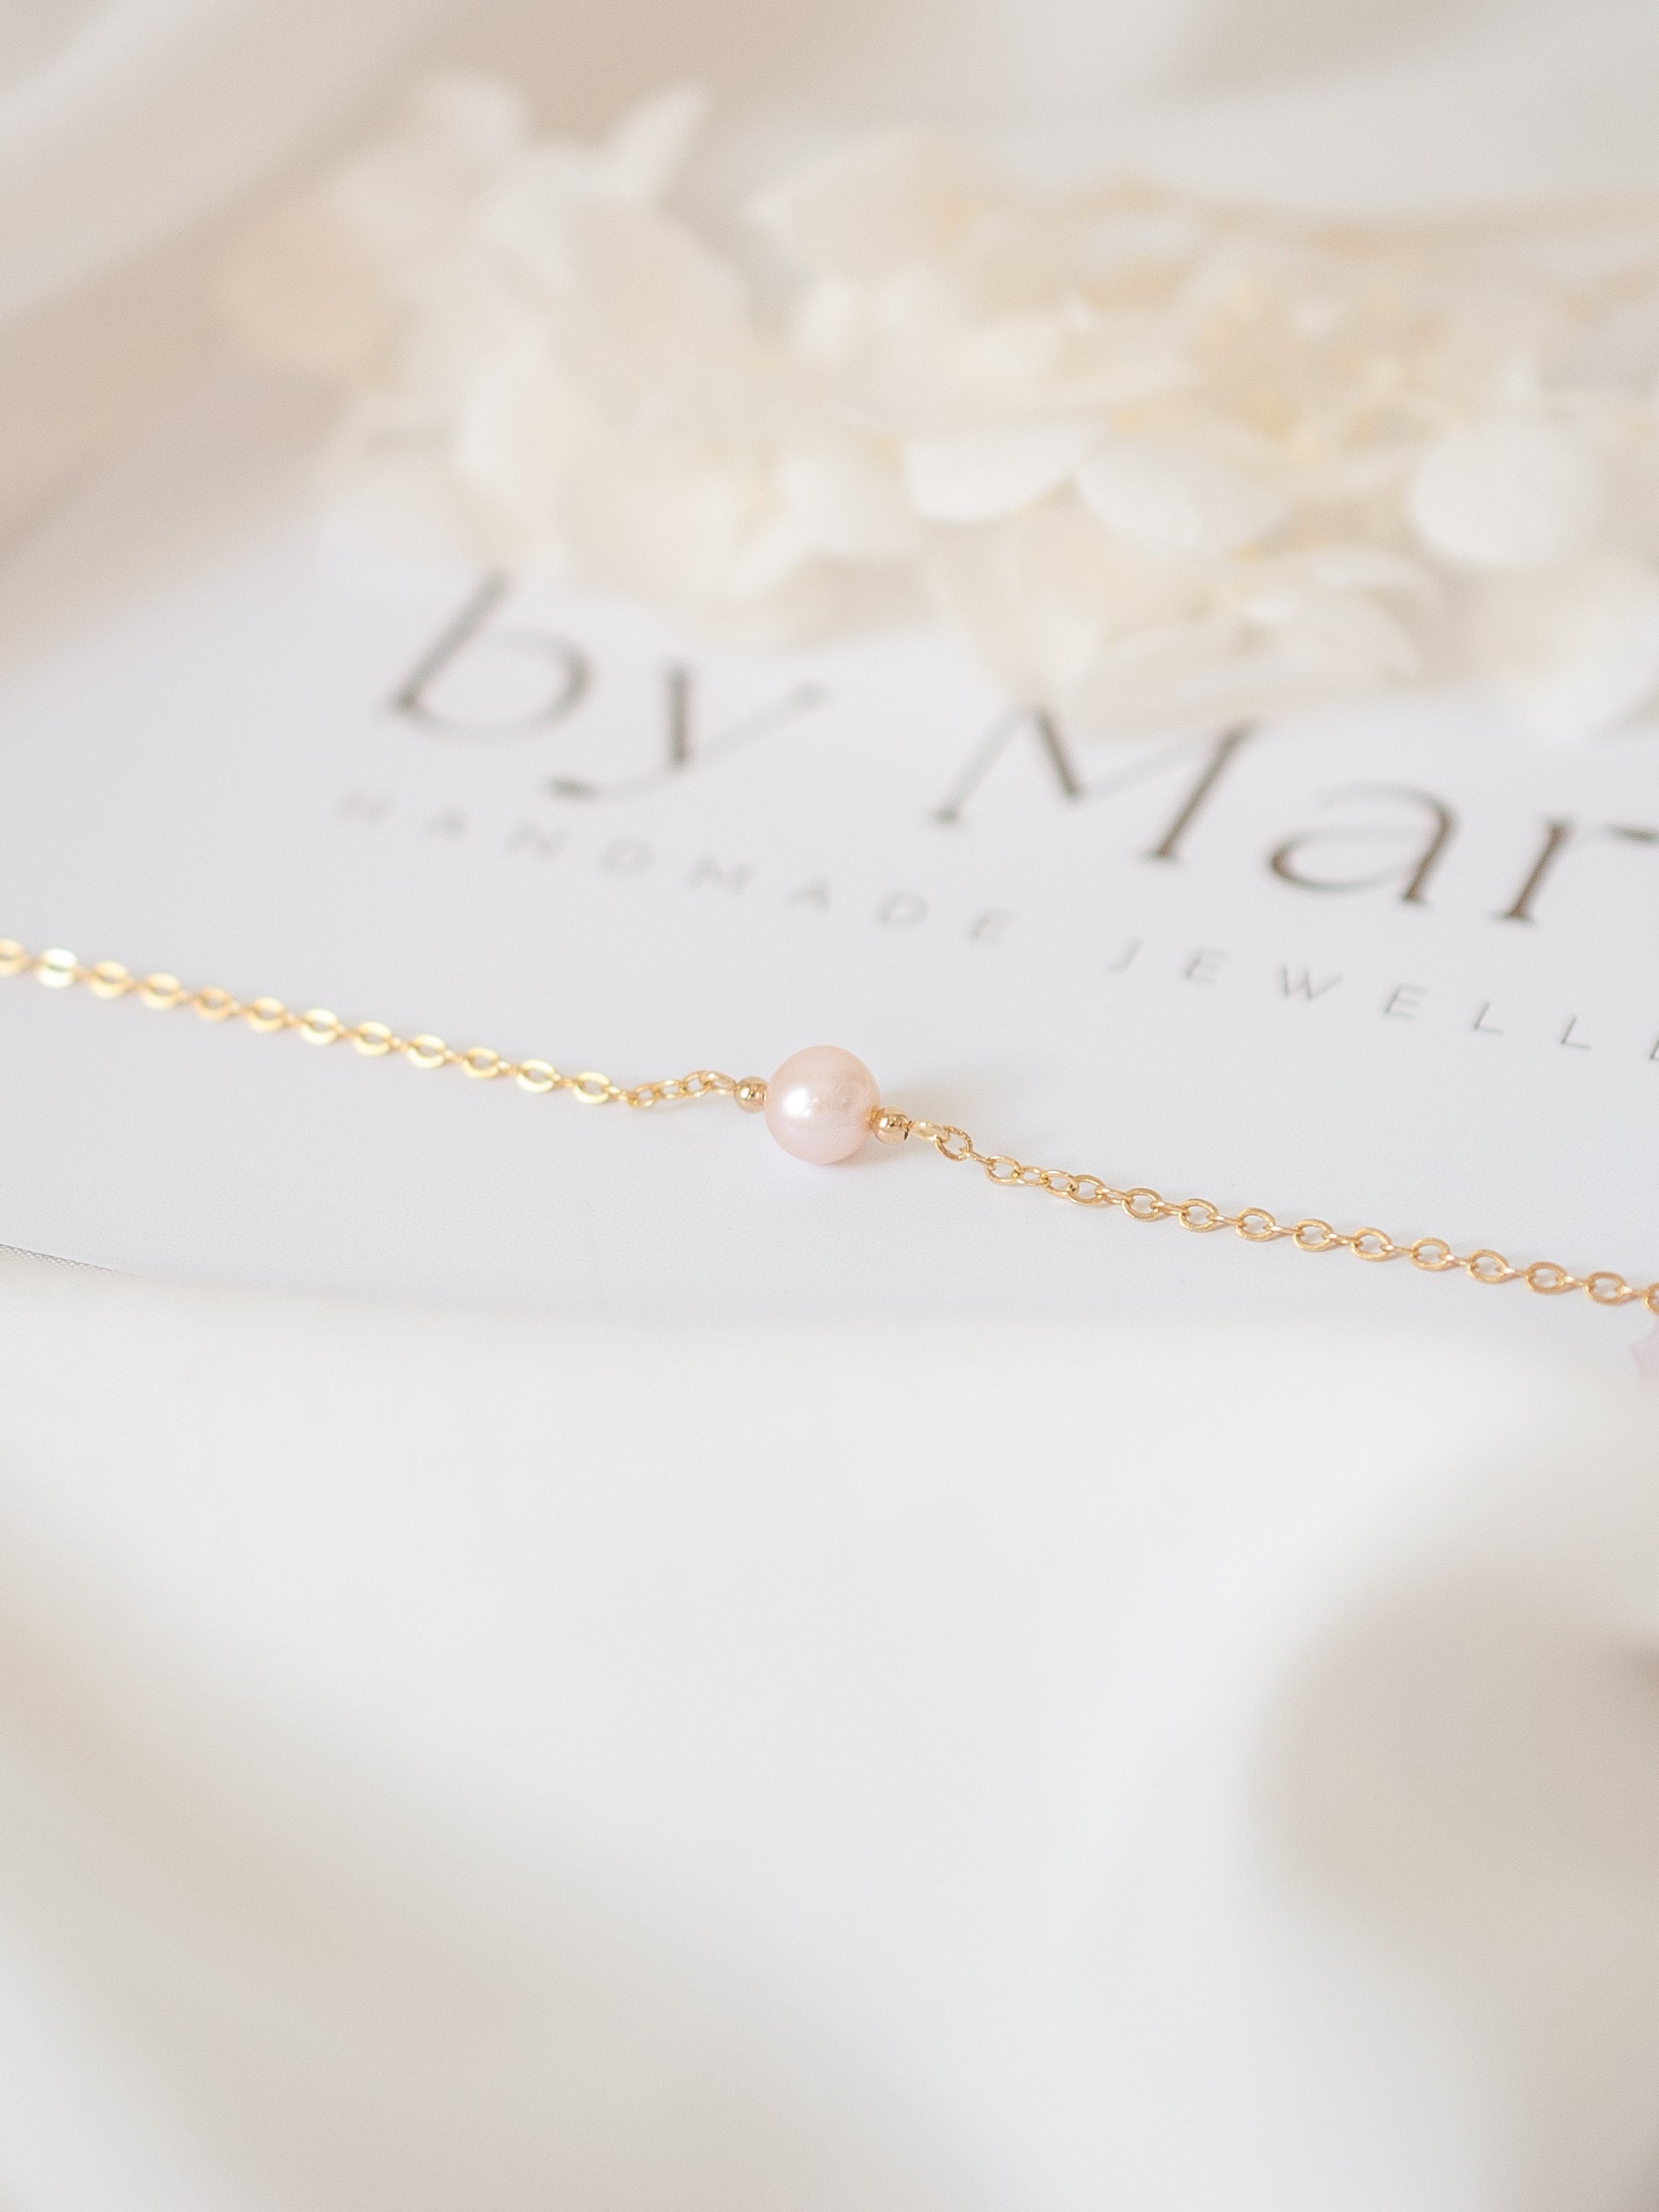 Pink Freshwater Pearl Bracelet L 14K Gold Filled Cable Chain & Details